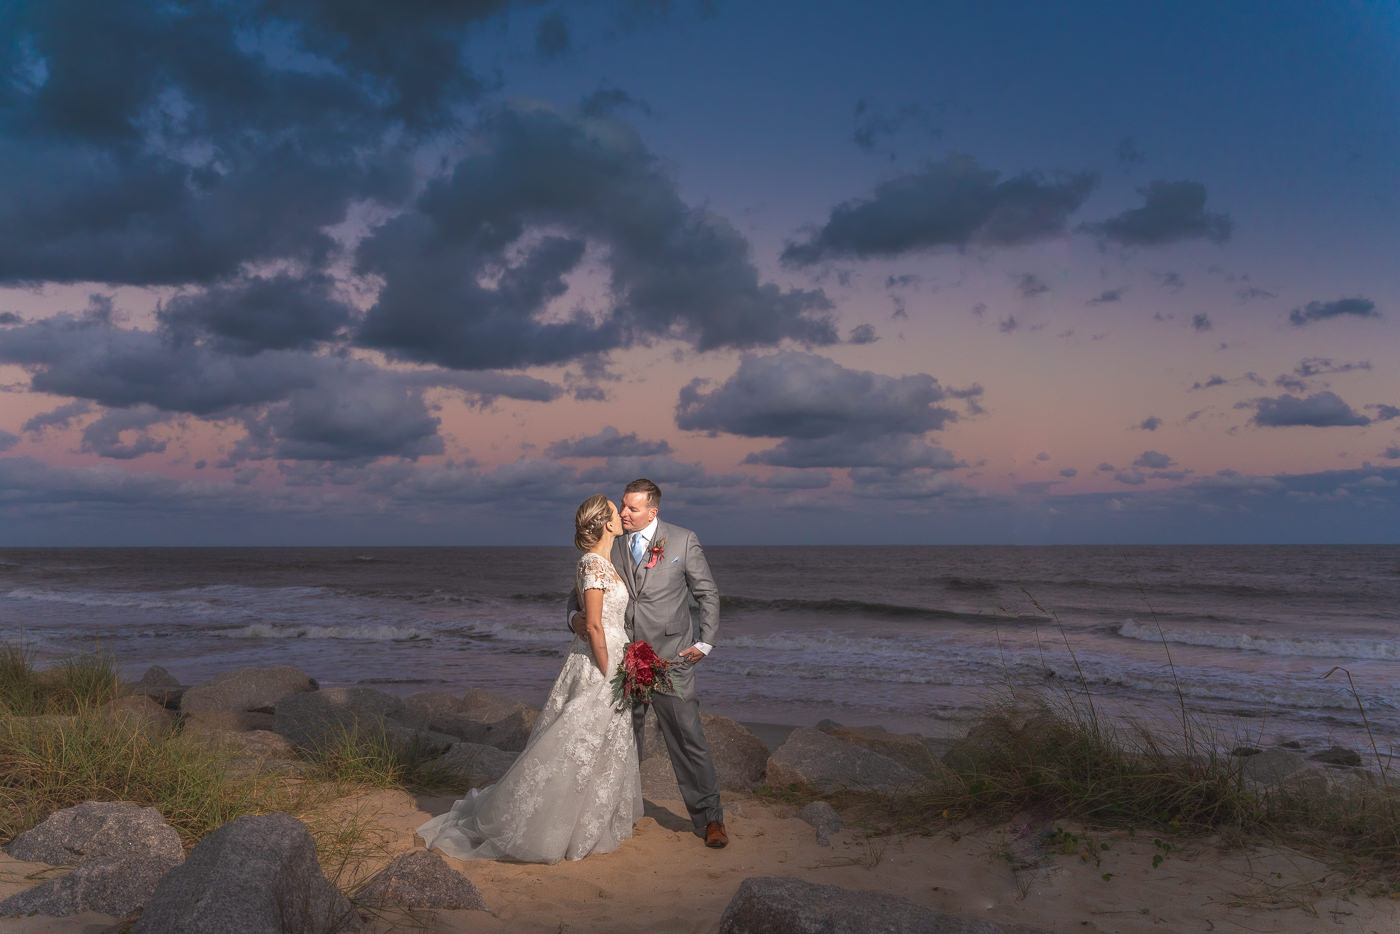 Fort Fisher Wedding Photographers - Ft Fisher Wedding Photography   -  Sunset wedding photo - bride  - groom - fort fisher beach - beach wedding  - Chris Lang Photography